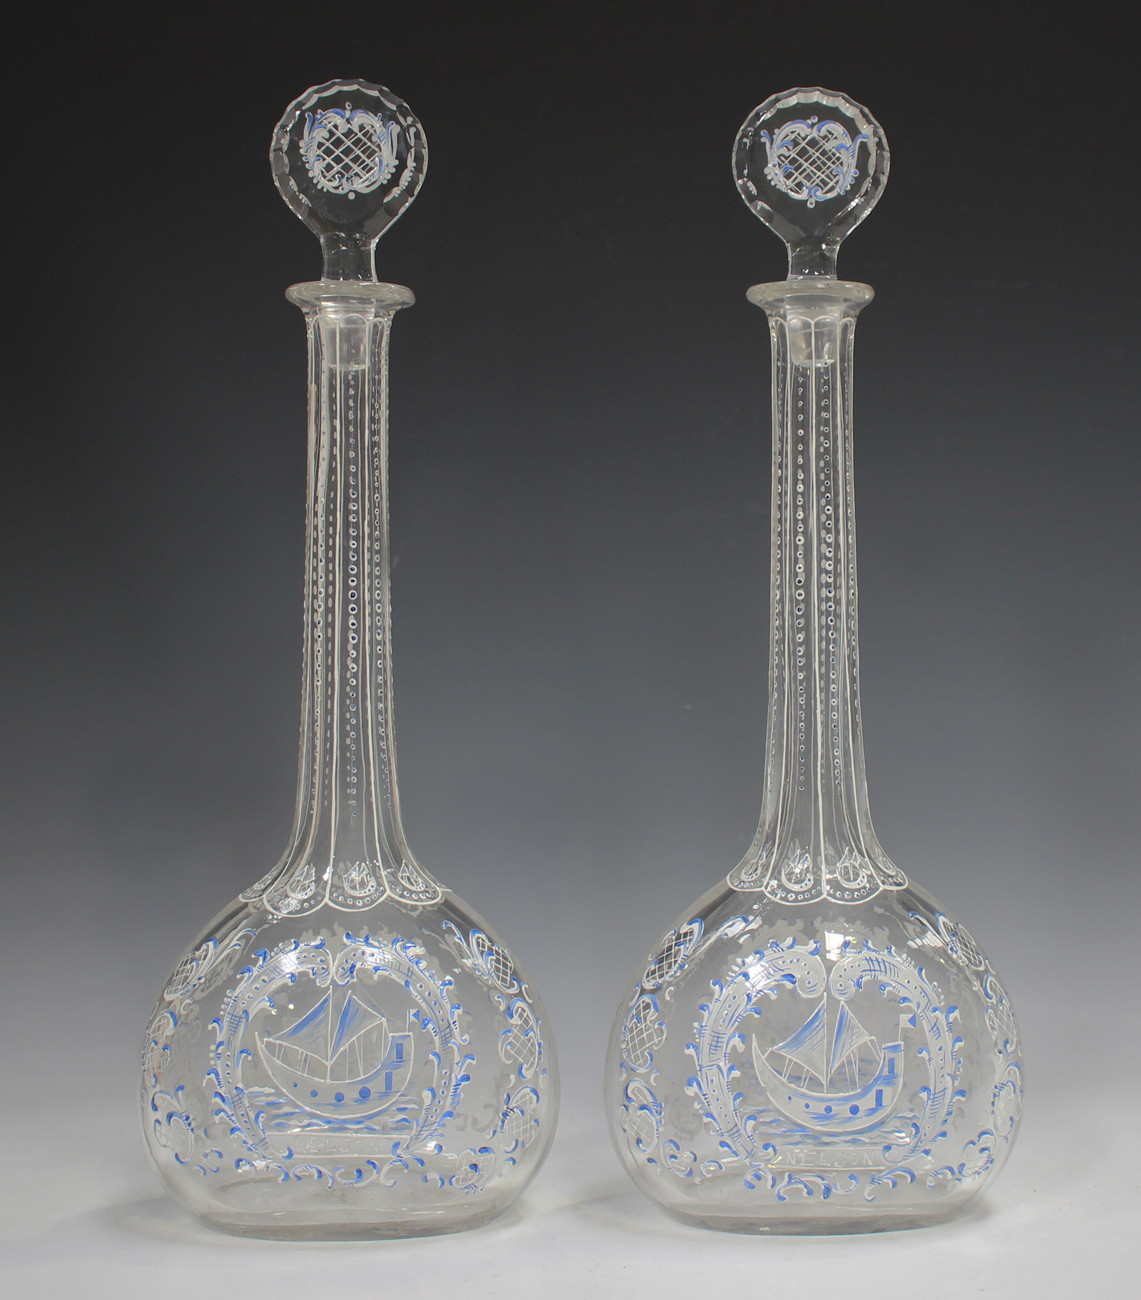 A pair of enamelled glass decanters and stoppers, 19th century, in Beilby style, each flattened